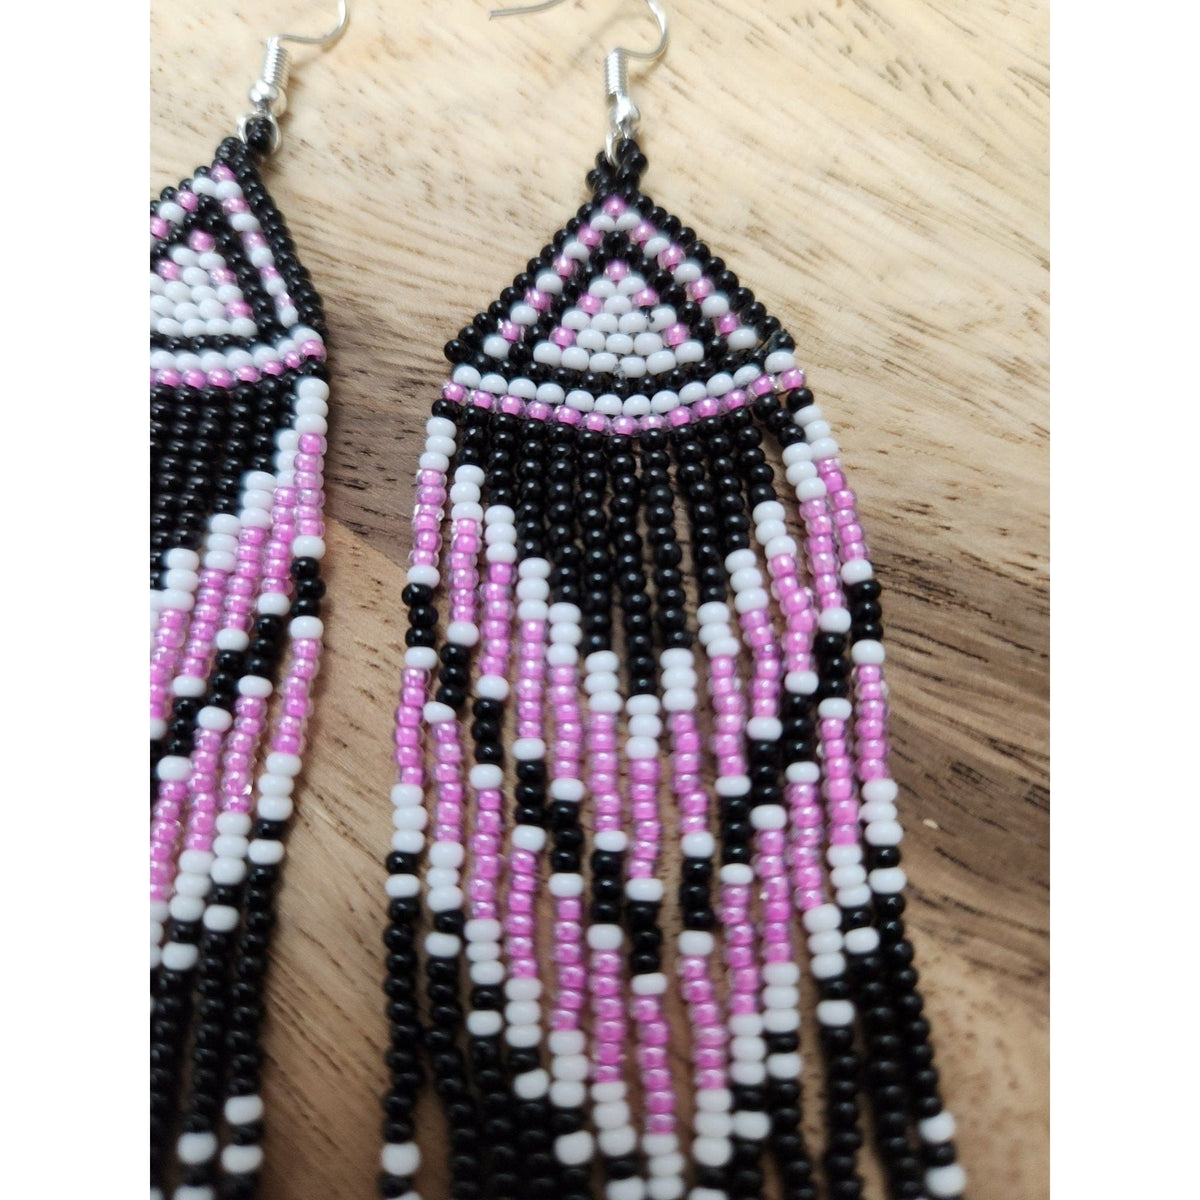 Pink and Black Long Fringe Beaded Earrings Beaded Earrings TheFringeCultureCollective